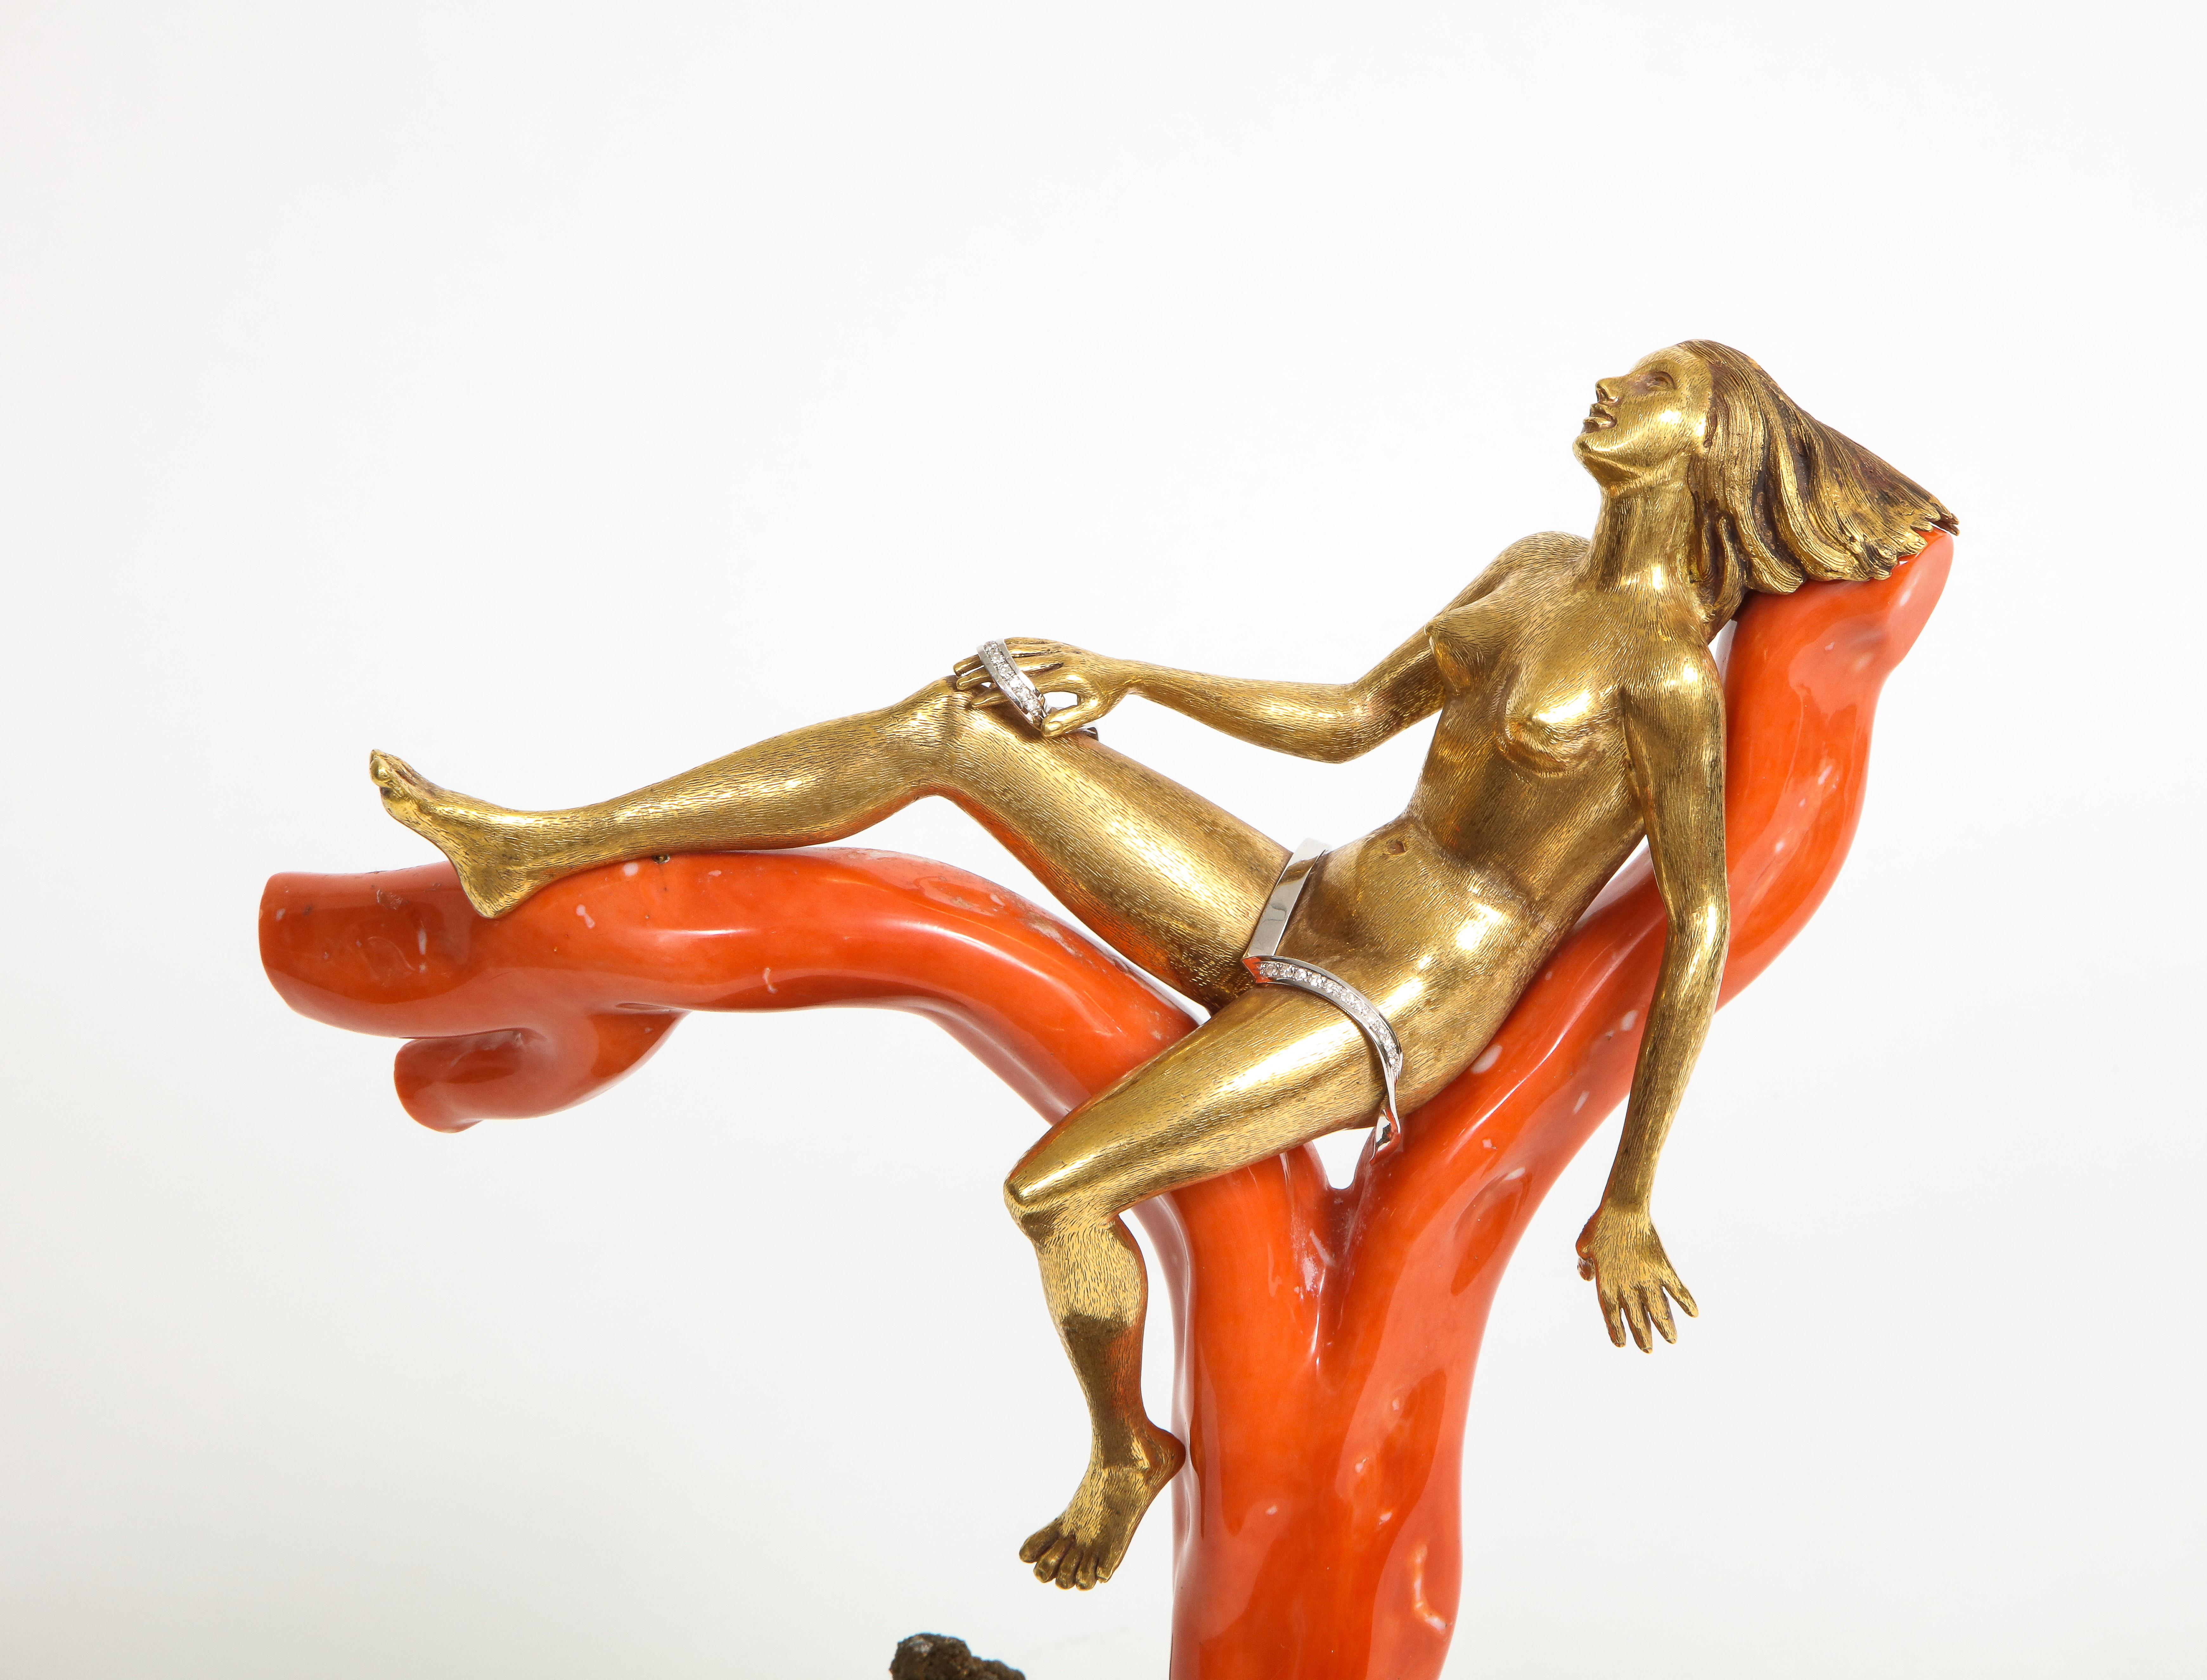 Gold & coral resting lady object by Romolo Grassi
The lady is 18k yellow gold on one very fine solid coral.
Accented with diamonds and mounted on quartz
Gold gram weight: 766.7 grams
Coral gram weight: 877.3 grams
Measurements: approximately